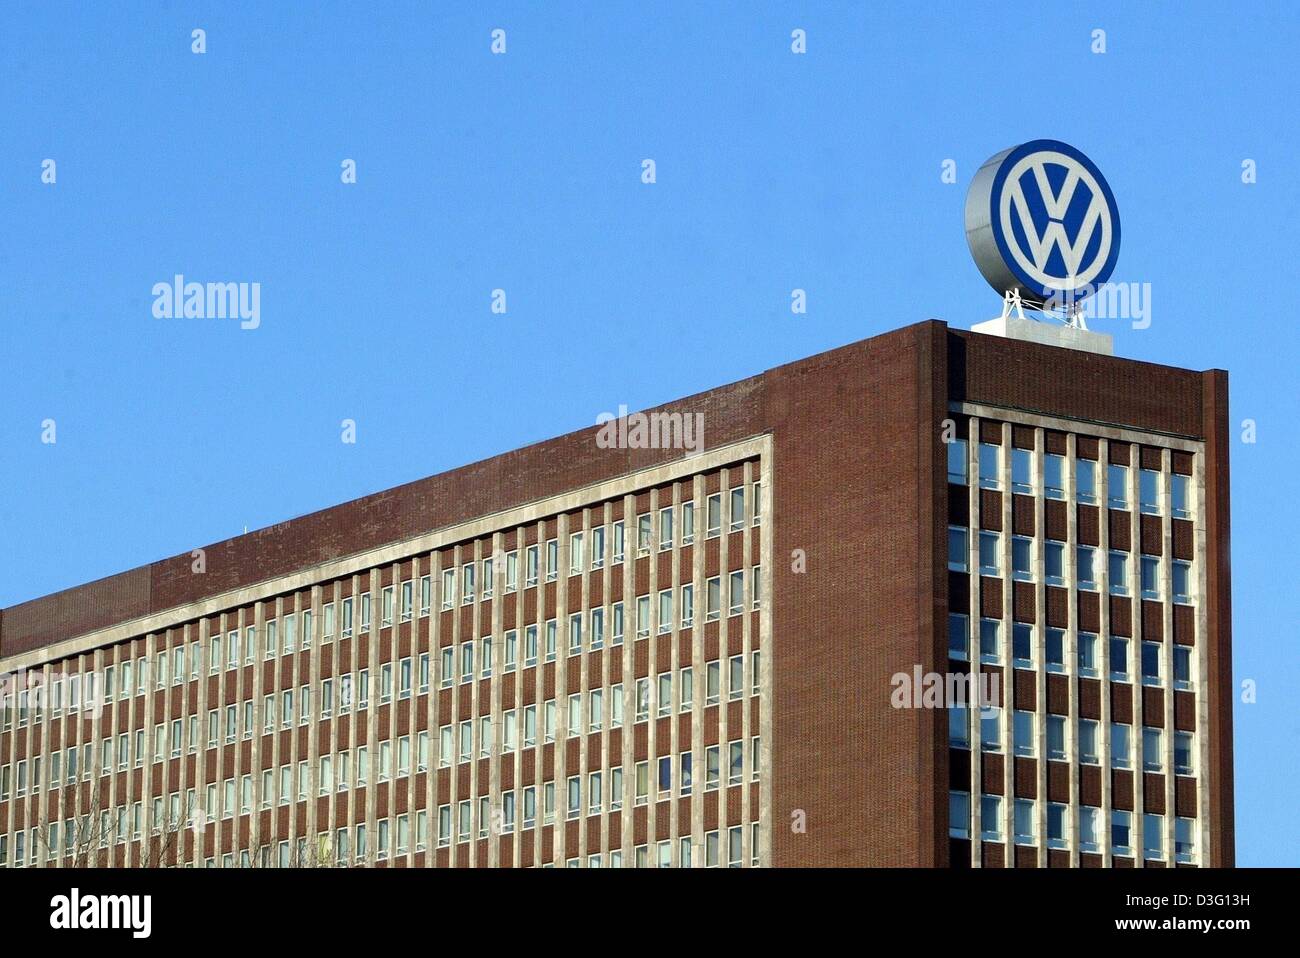 dpa) - A view of Volkswagen's (VW) company logo atop an office building at VW  headquarters in Wolfsburg, Germany, 23 February 2003 Stock Photo - Alamy